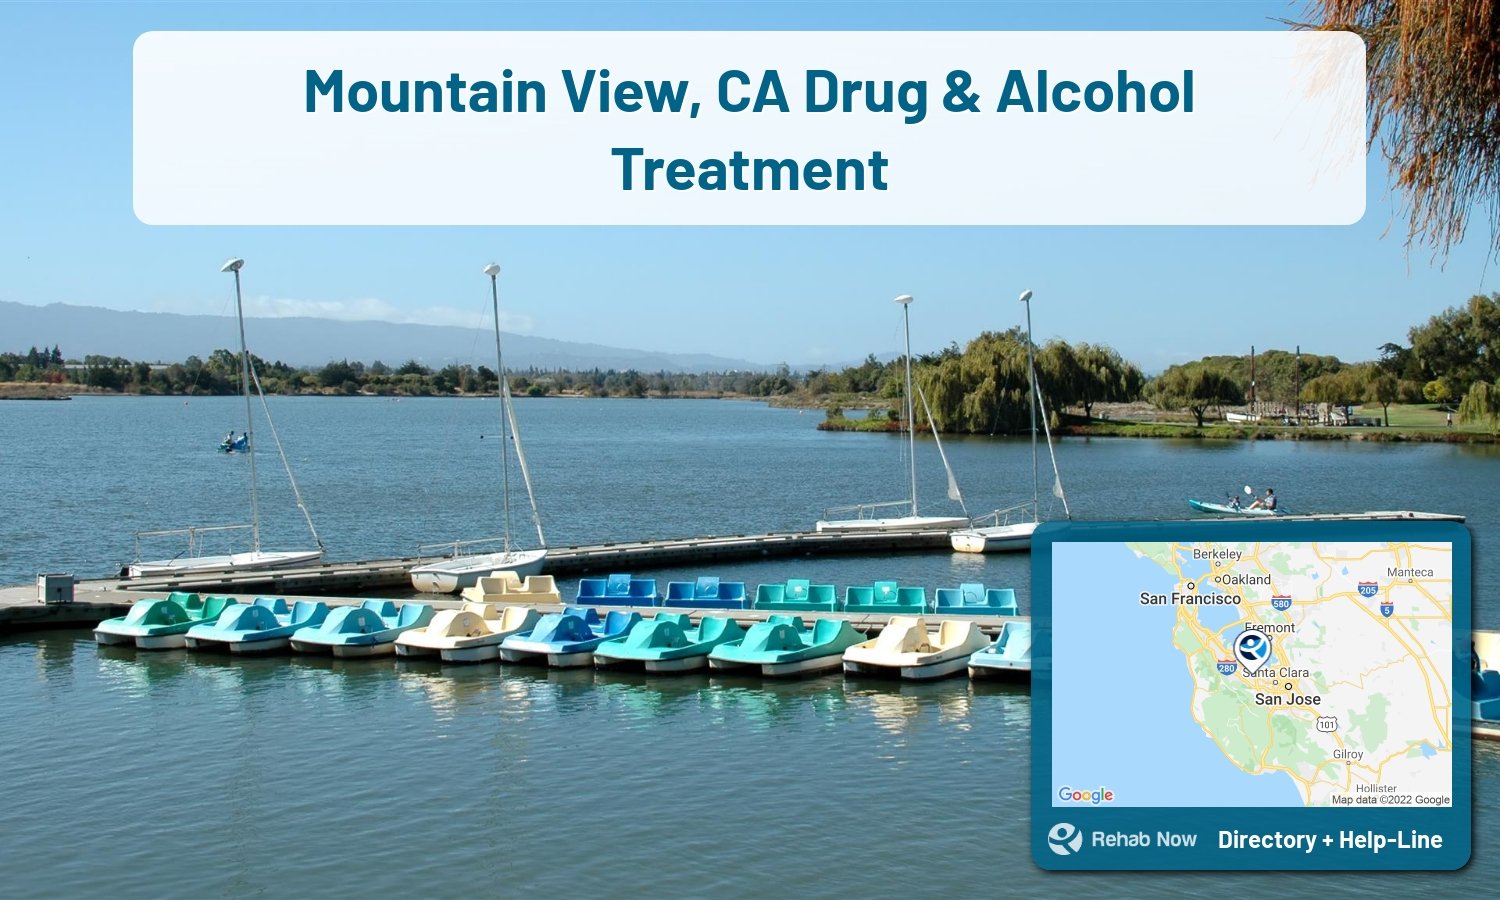 Drug rehab and alcohol treatment services nearby Mountain View, CA. Need help choosing a treatment program? Call our free hotline!